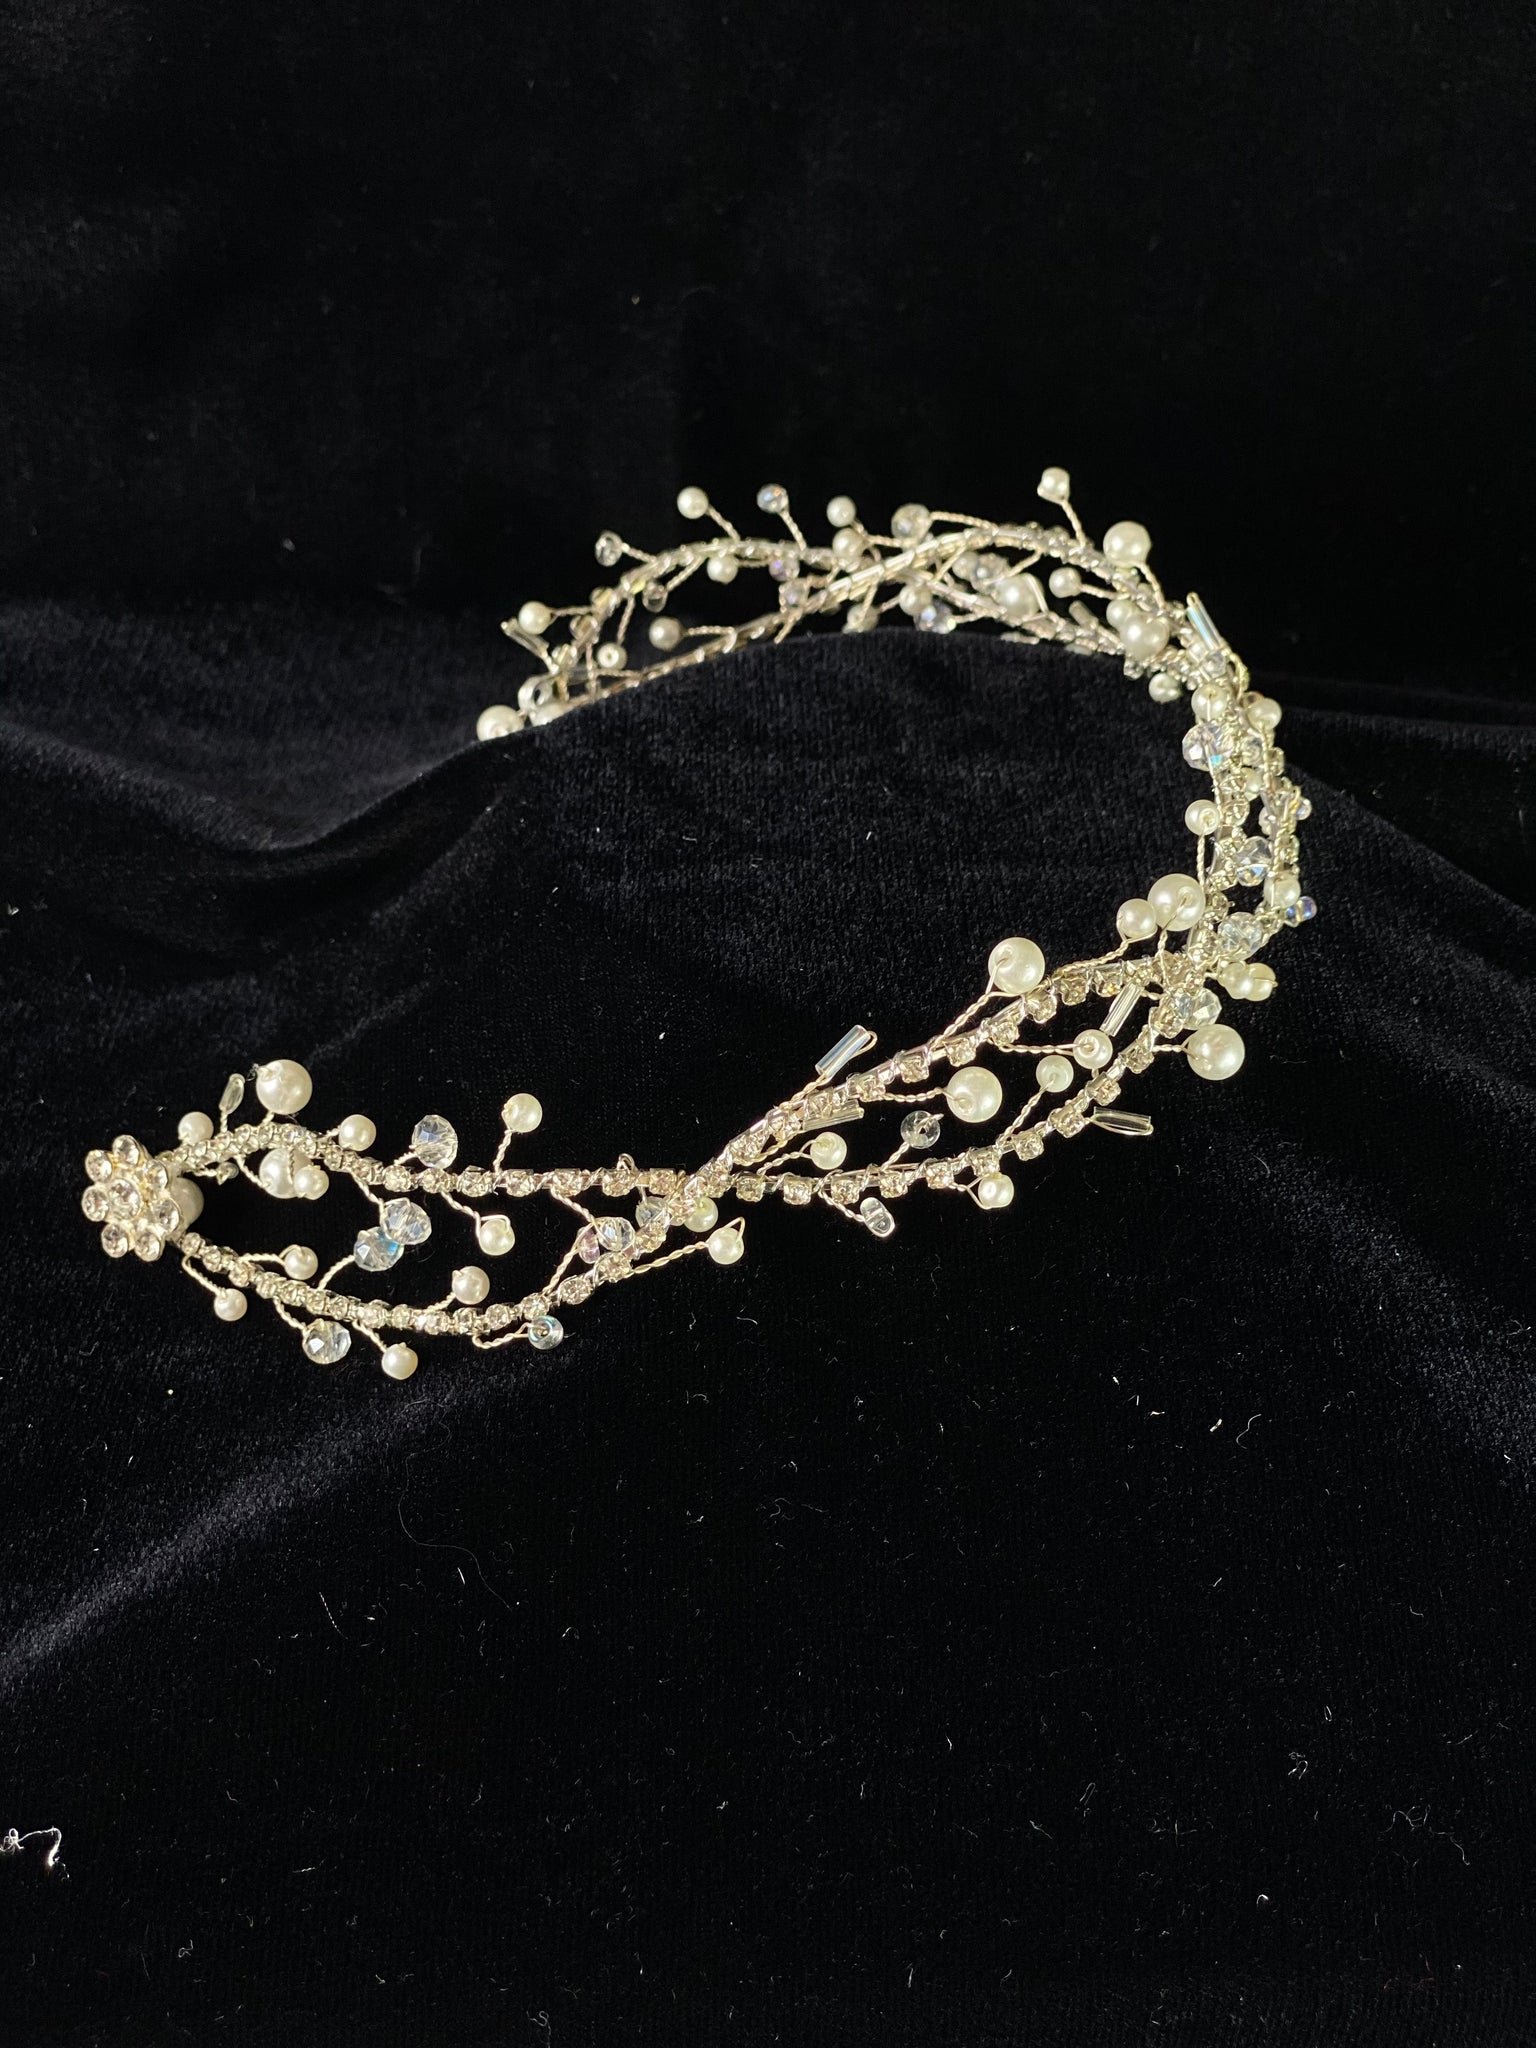 Beautiful headband applique with pearl and rhinestone detailing.   Headband is 14.5" long, to wrap beautifully around the head. To secure in on the head properly, bobby pins will need to be used, 